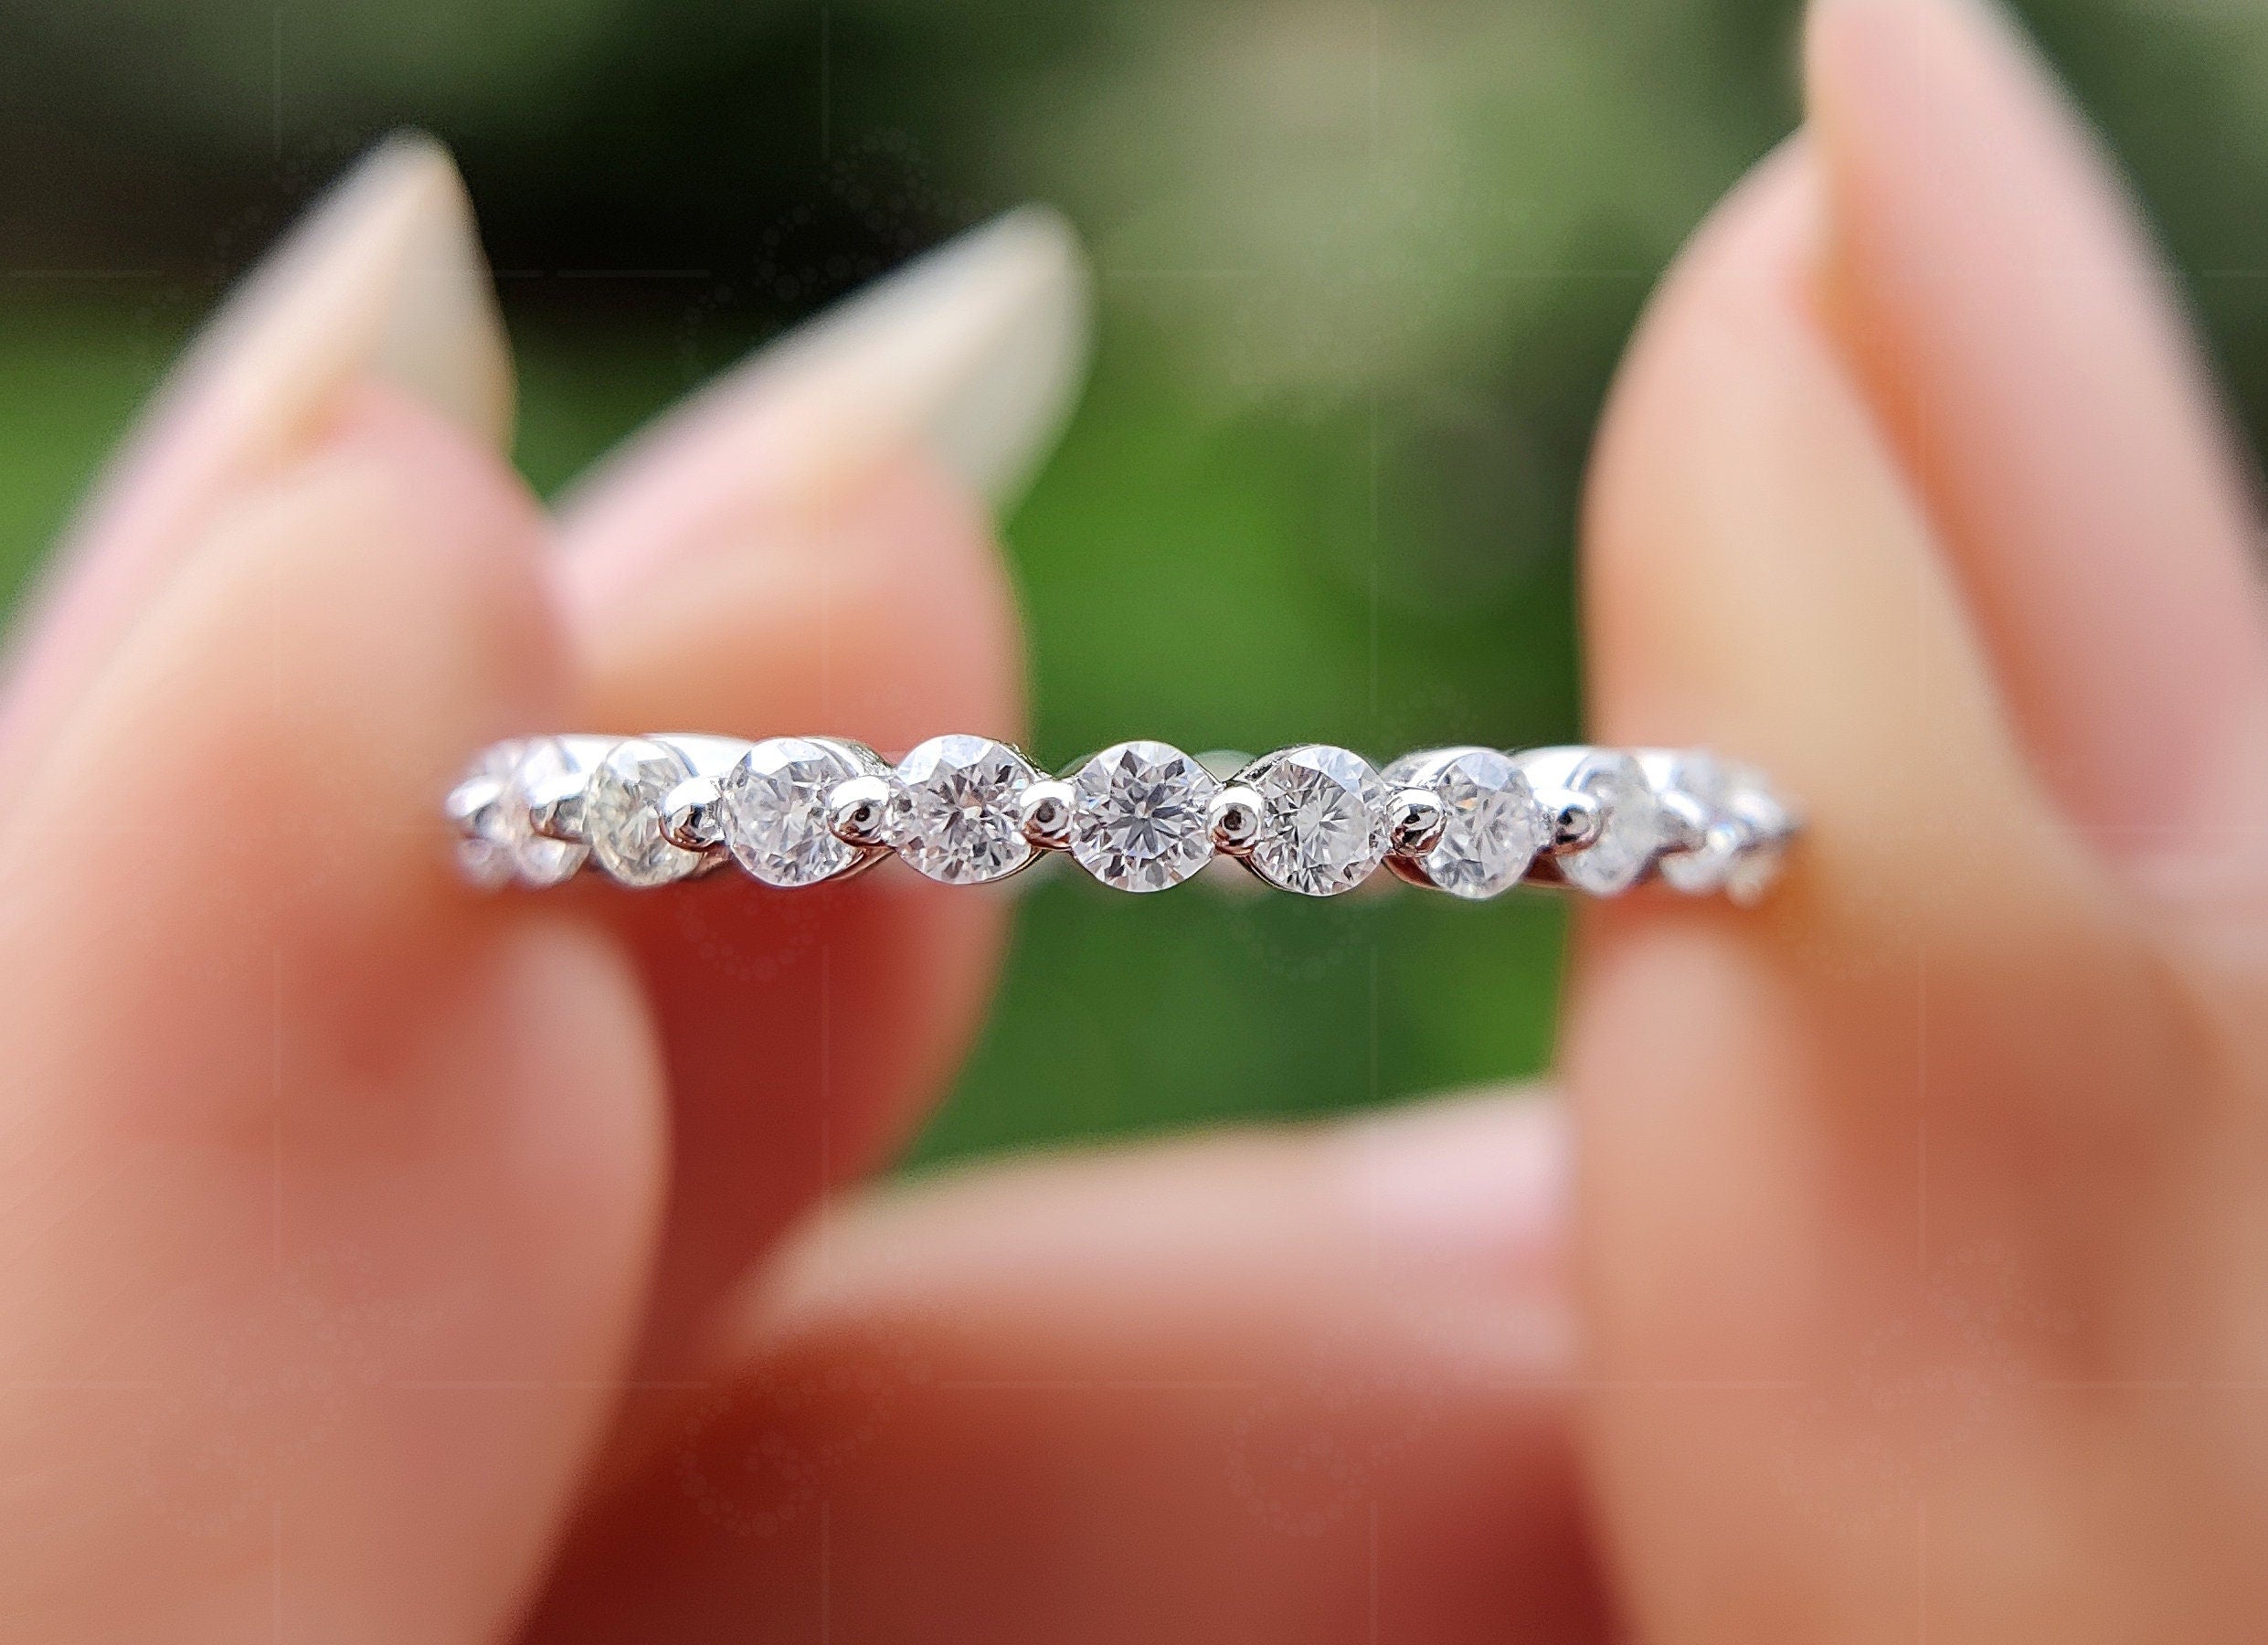 Elegant Bubble Diamond Wedding Bands for Women - Single Shared Prong Design with Floating Bubble Full Eternity Beauty - Lab Grown Diamond Stackable Rings